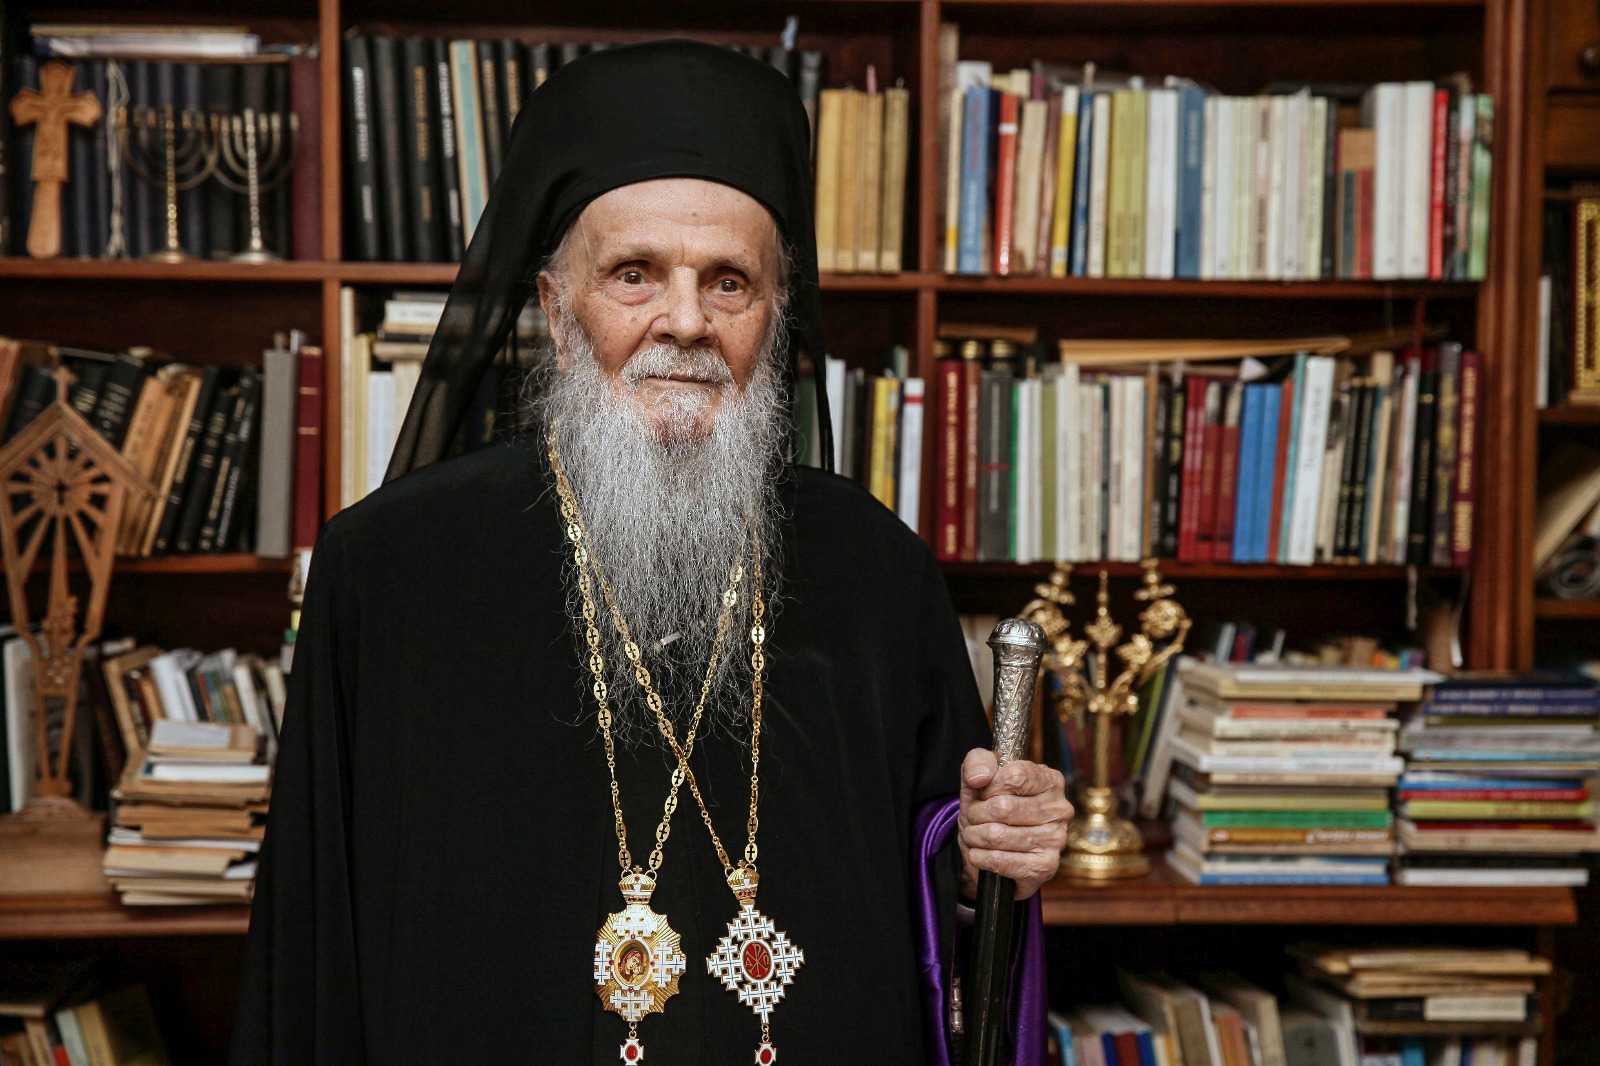 Ten famous quotes from Archbishop Justinian Chira